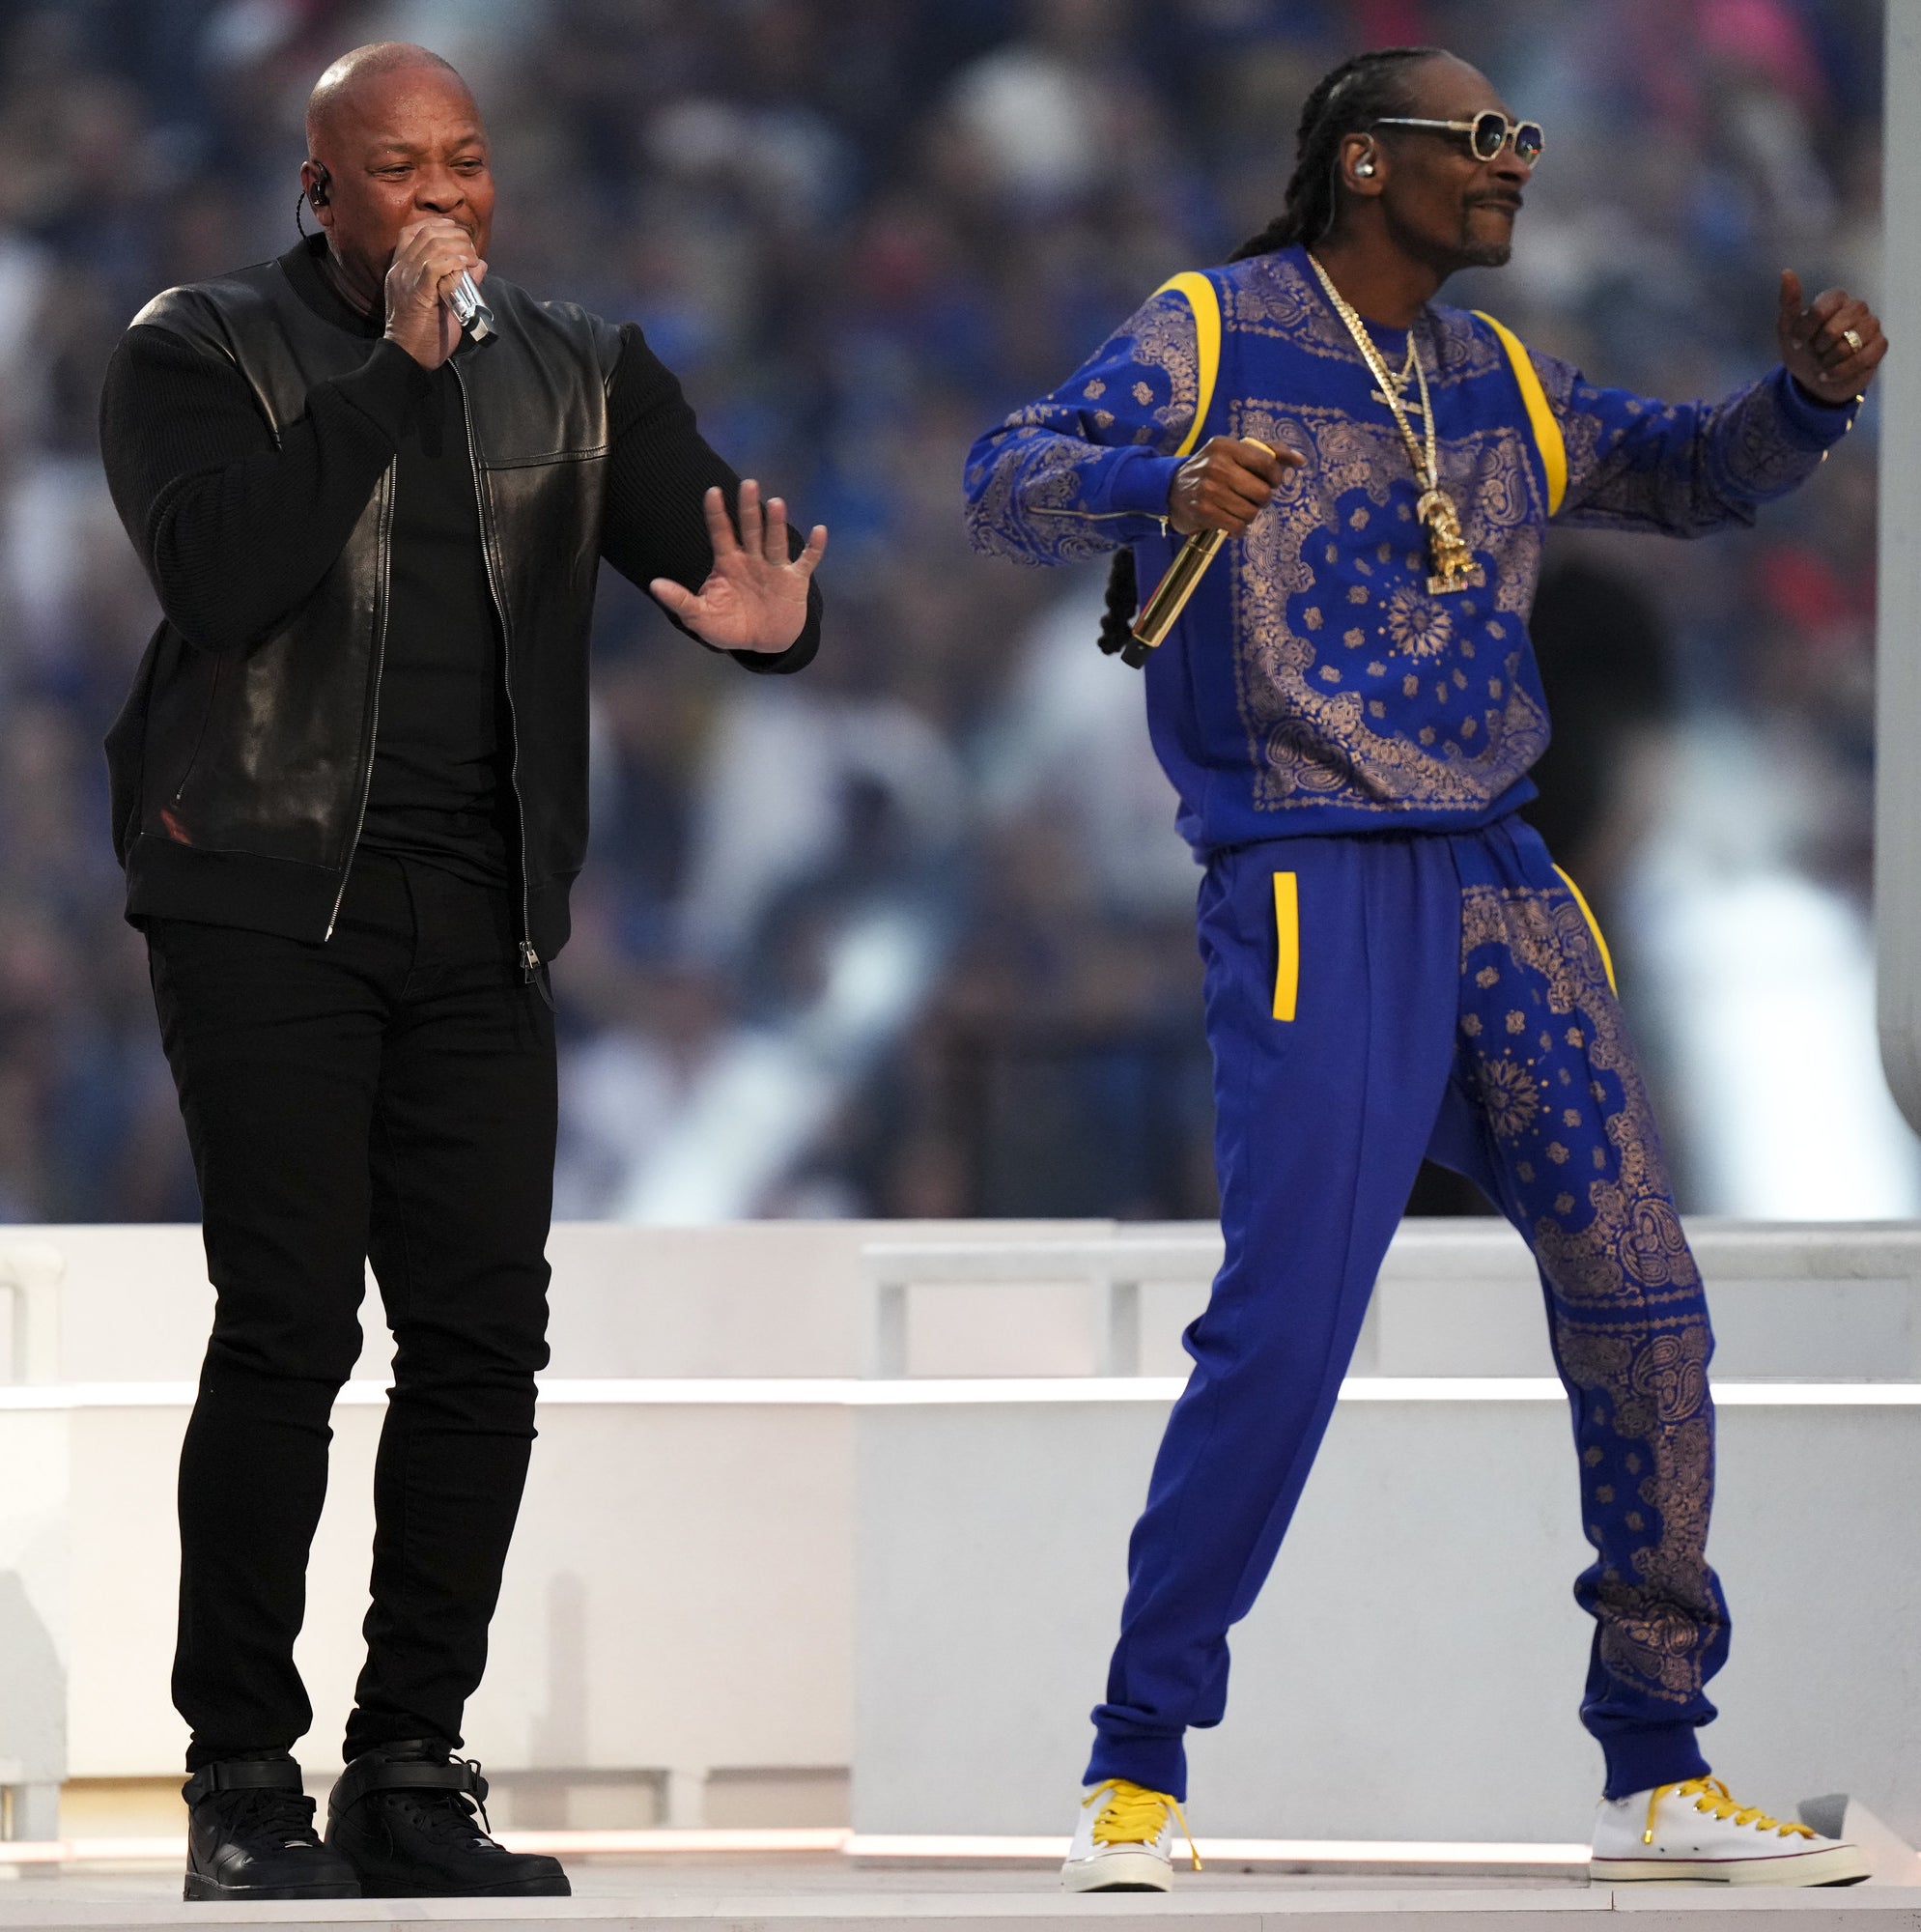 Eminem, Kendrick Lamar, Dr. Dre, Mary J. Blige, 50 Cent and Snoop Dogg perform at the halftime show